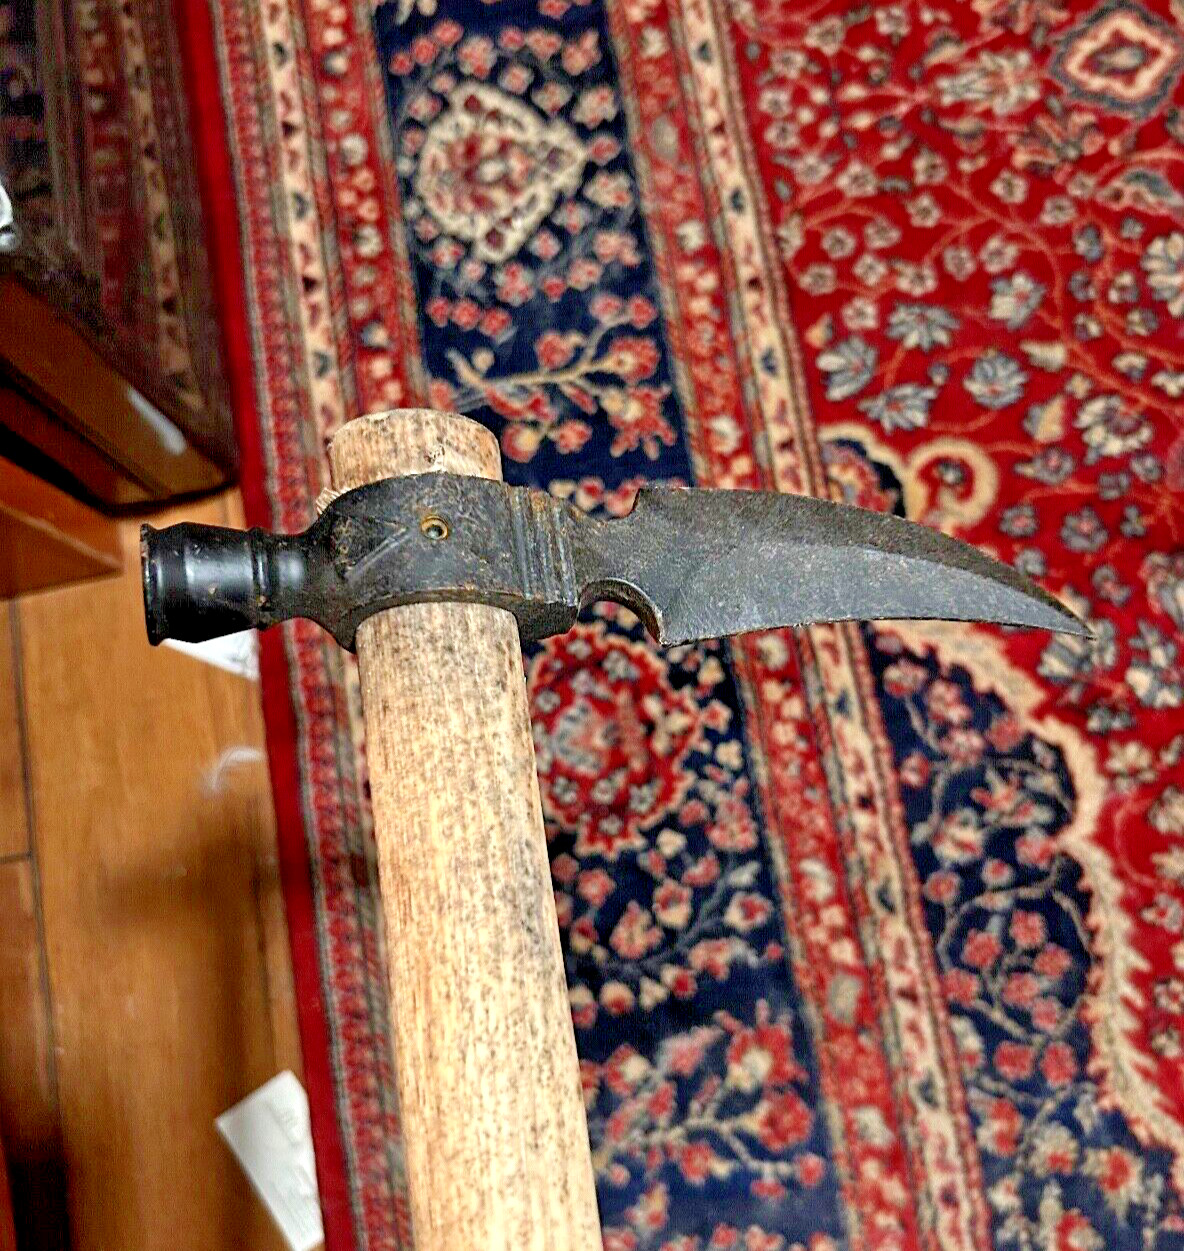 COLD STEEL TOMAHAWK DROPPING SPIKE AXE